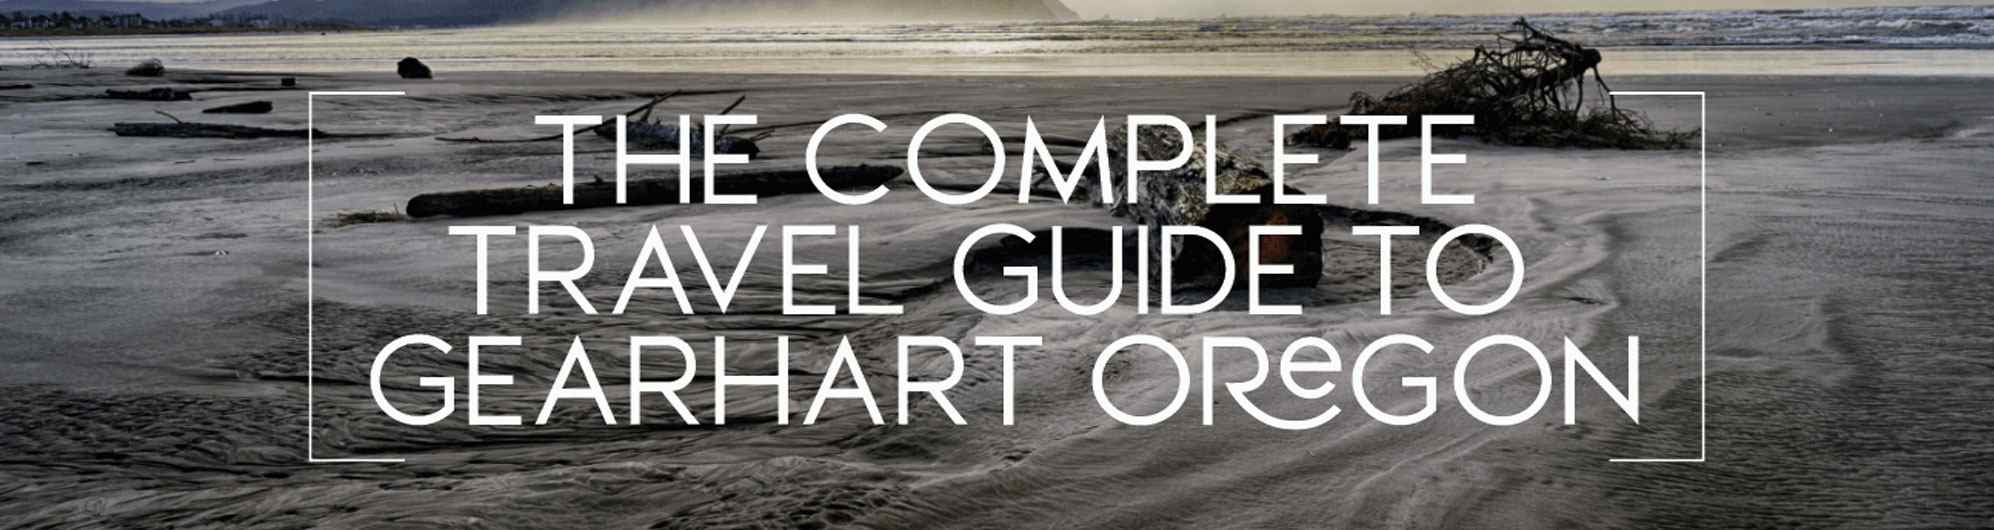 Gearhart Travel Guide